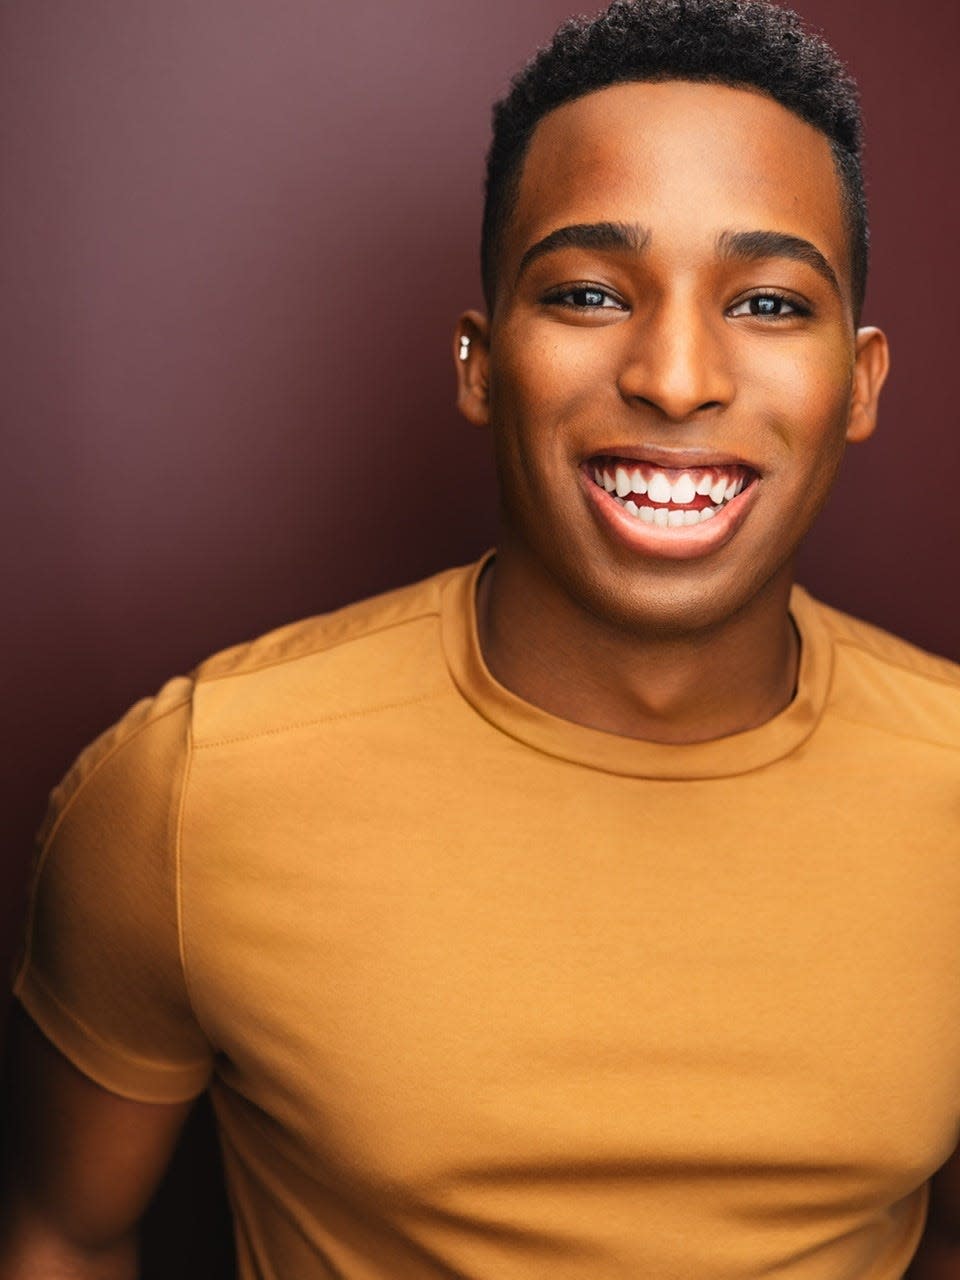 Joshua Kenneth Allen Johnson is an actor from Jacksonville. He uses his full name as a tribute to his father and grandfather.